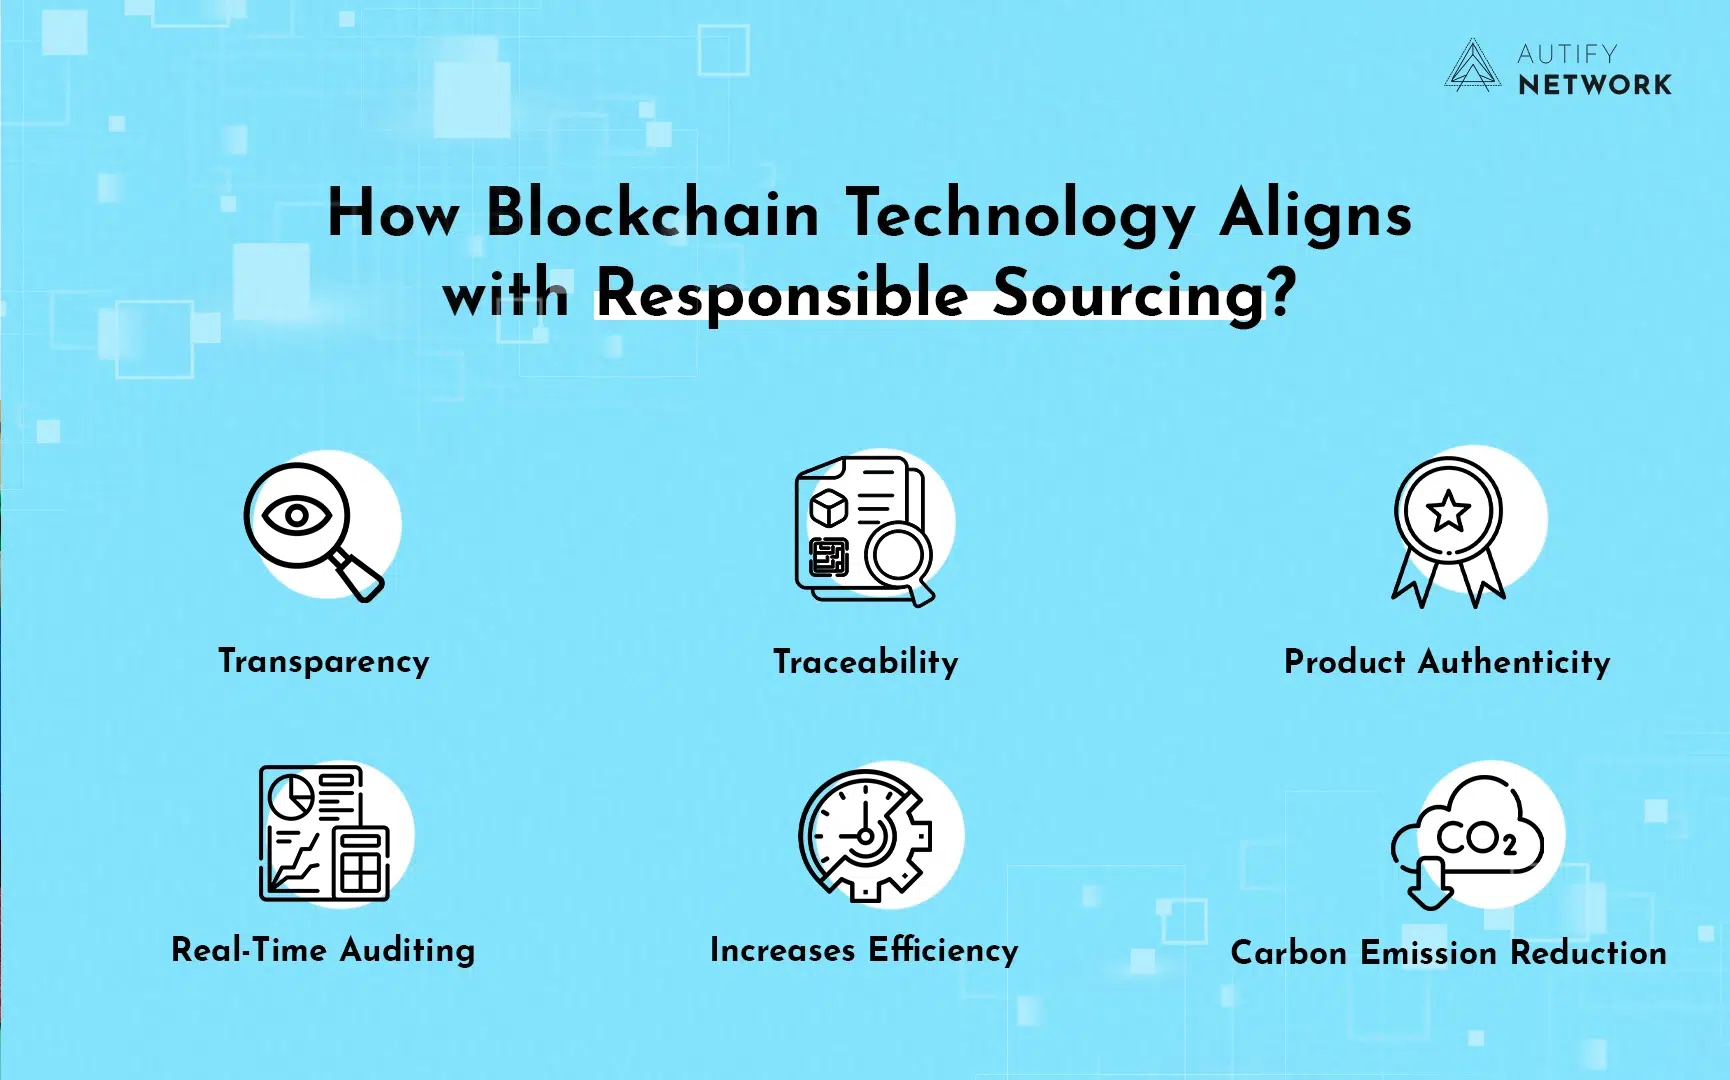 Where does Blockchain Technology align with Responsible Sourcing